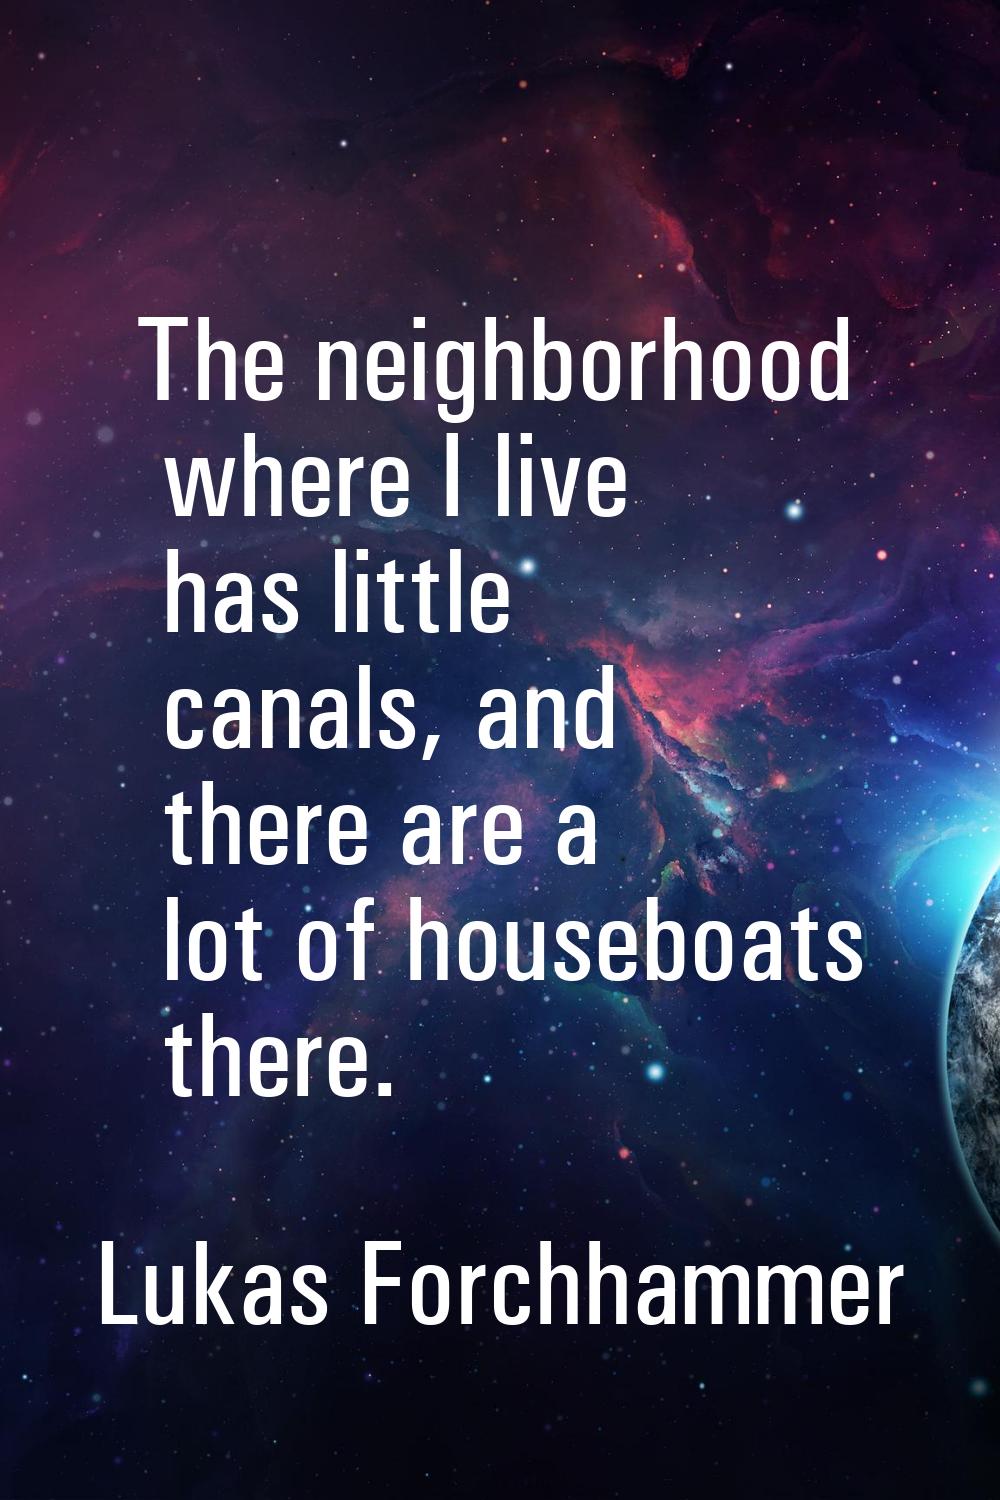 The neighborhood where I live has little canals, and there are a lot of houseboats there.